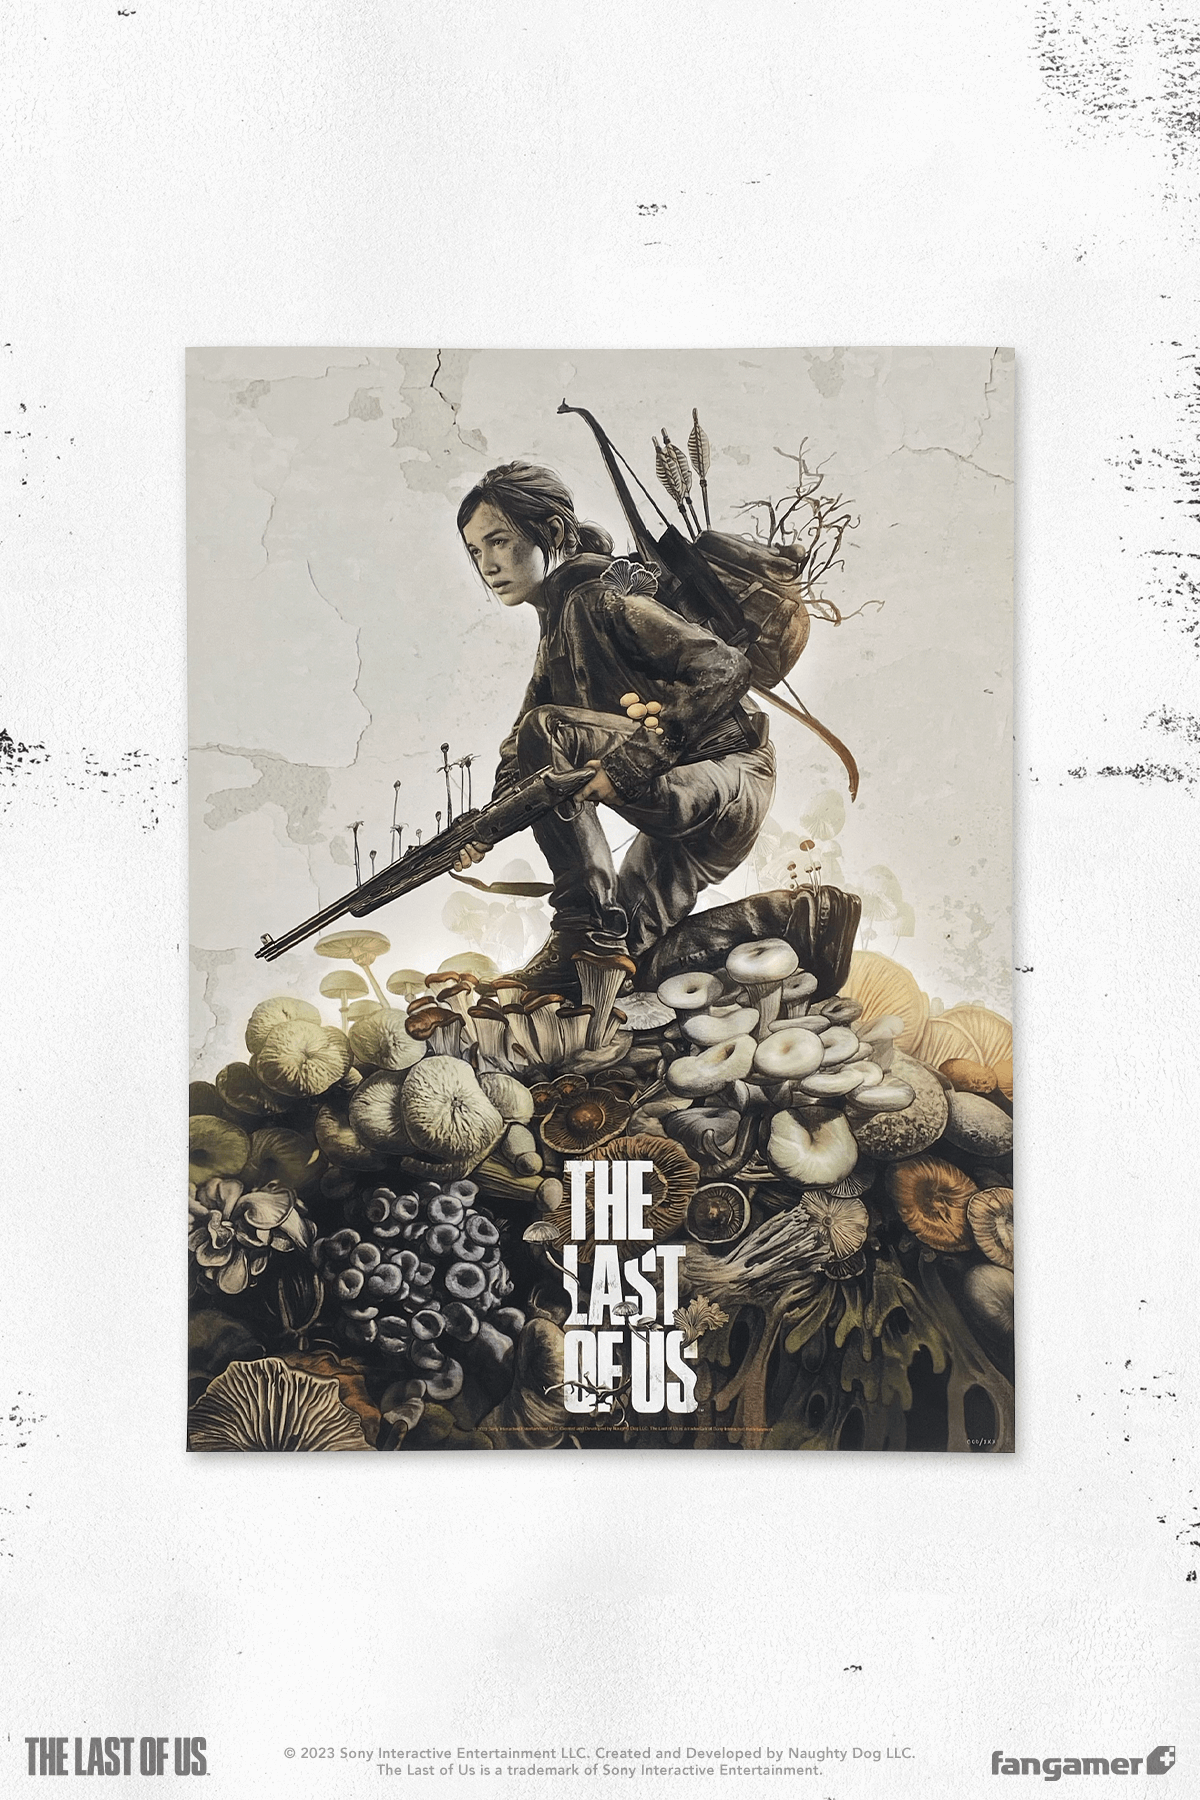 The Last of Us Day 2022